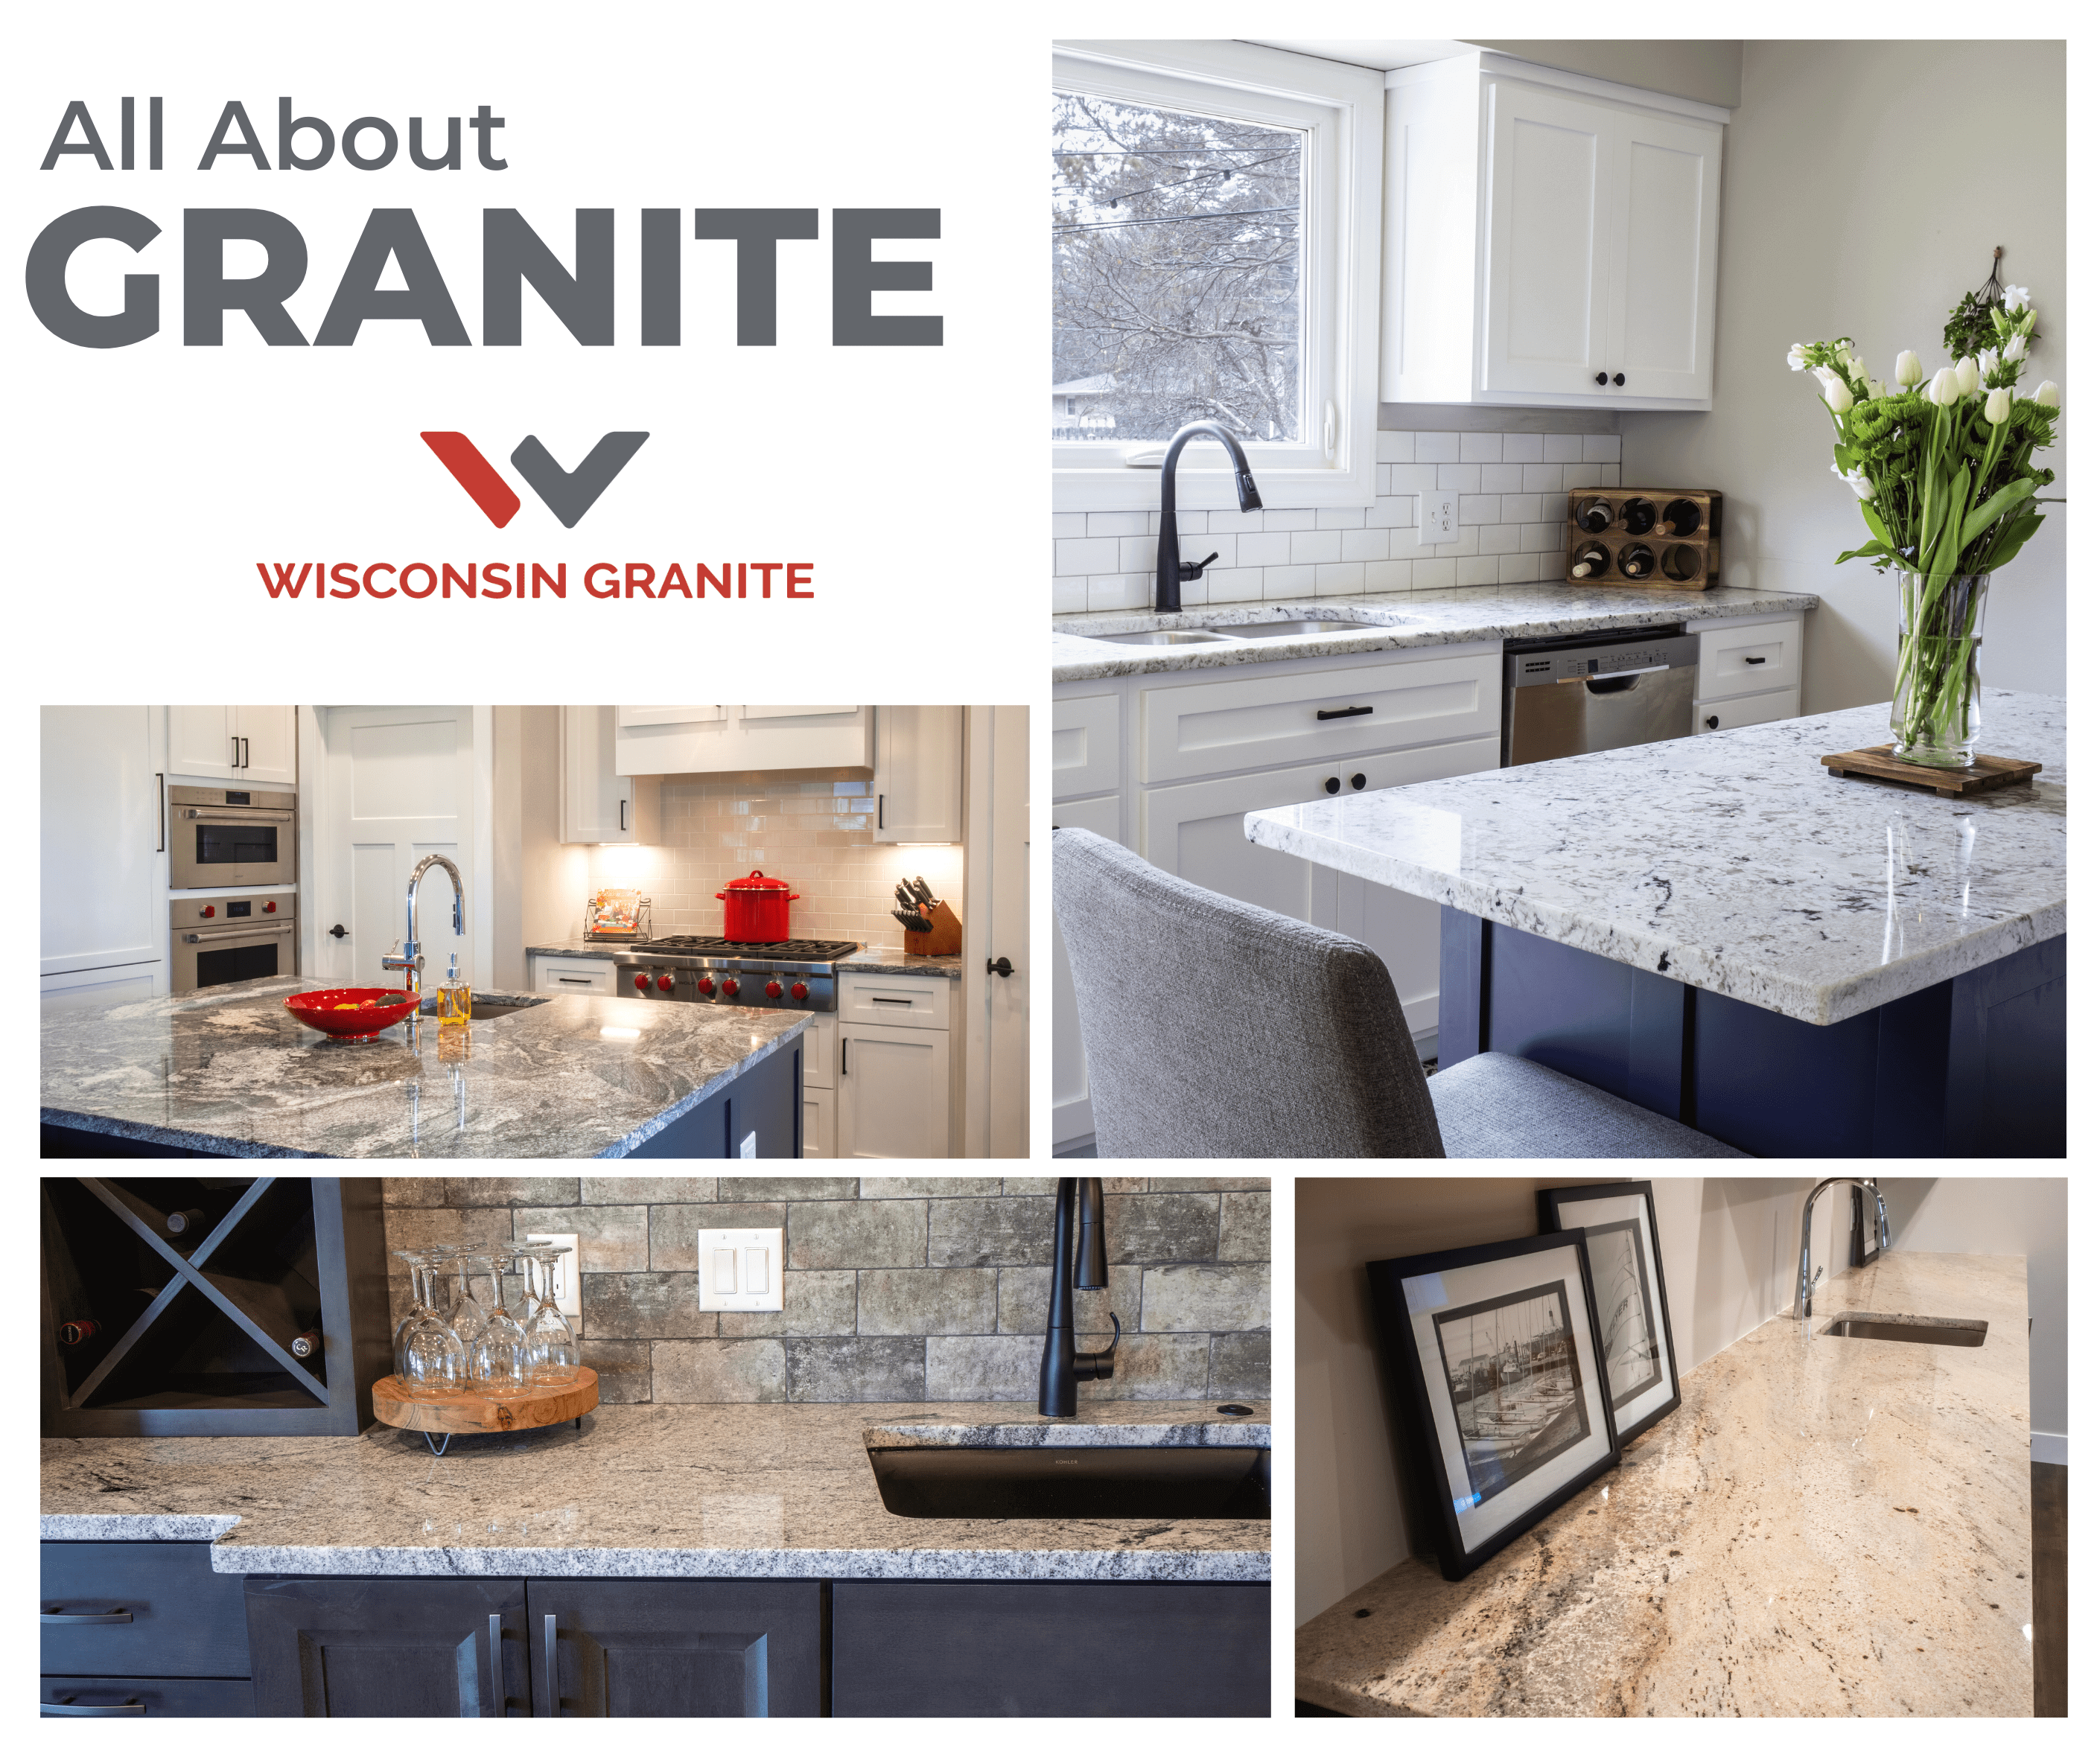 All About Granite